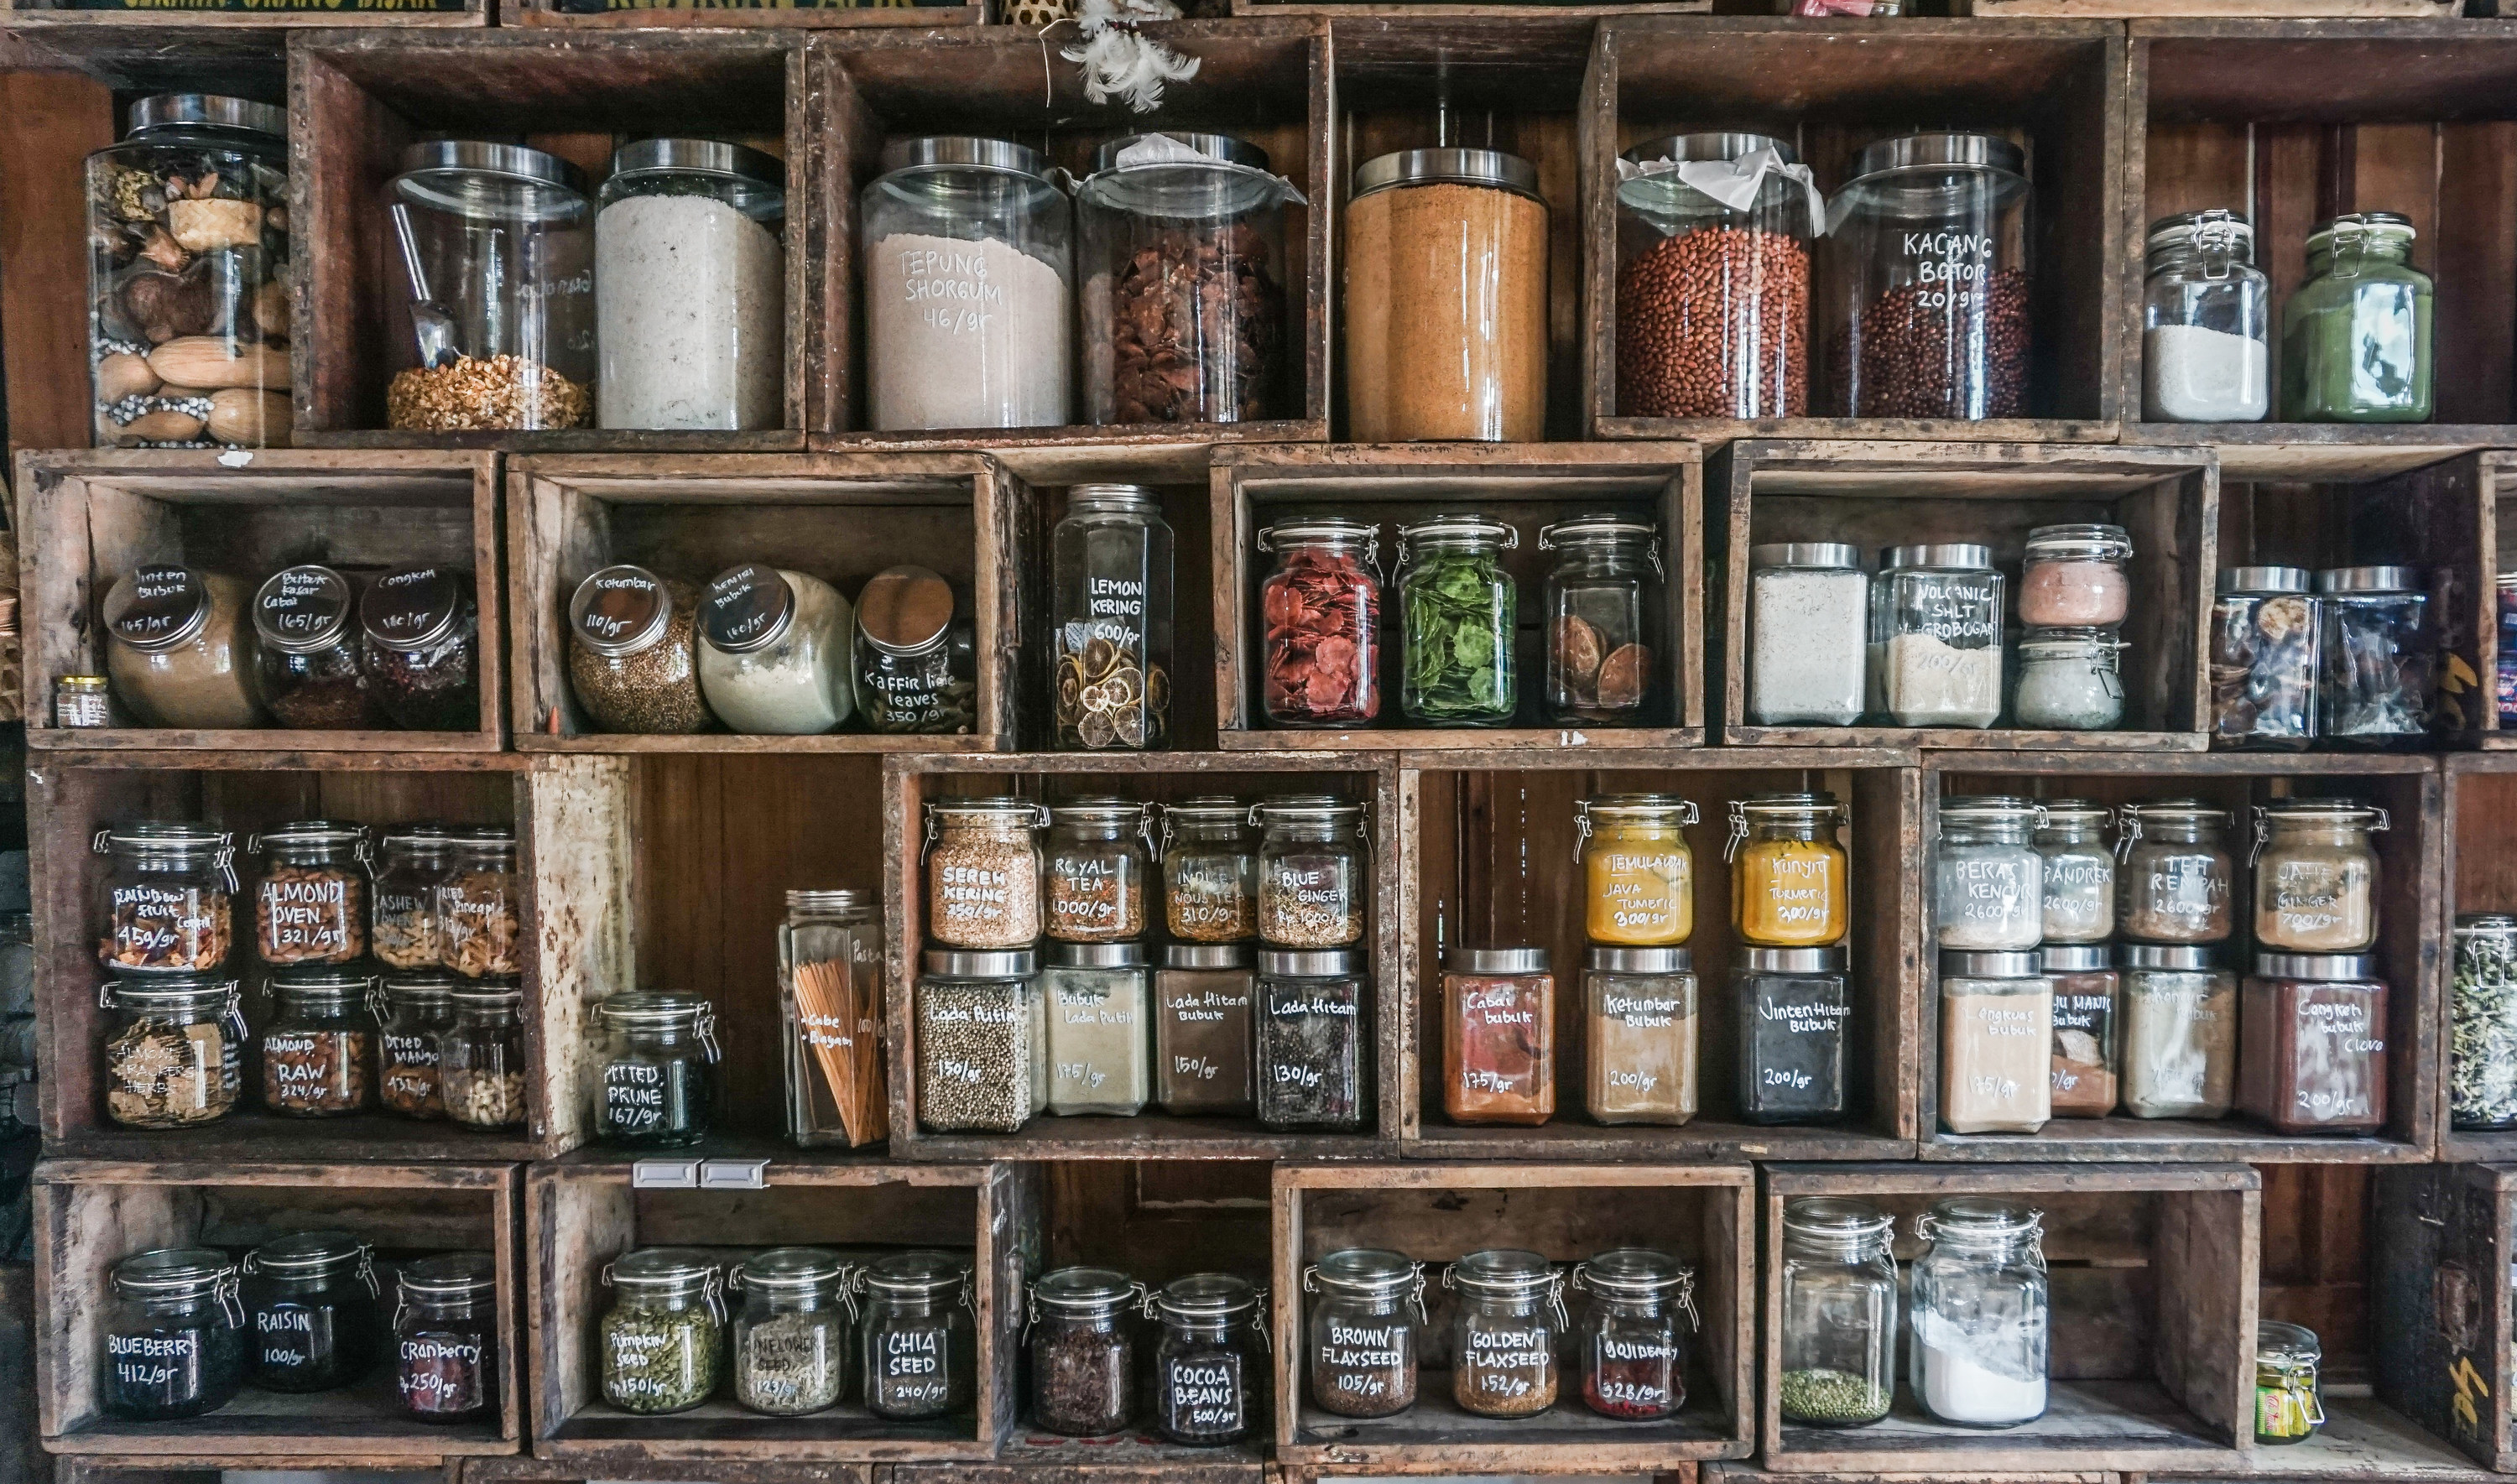 A variety of spices and seasonings on display in open cubbies